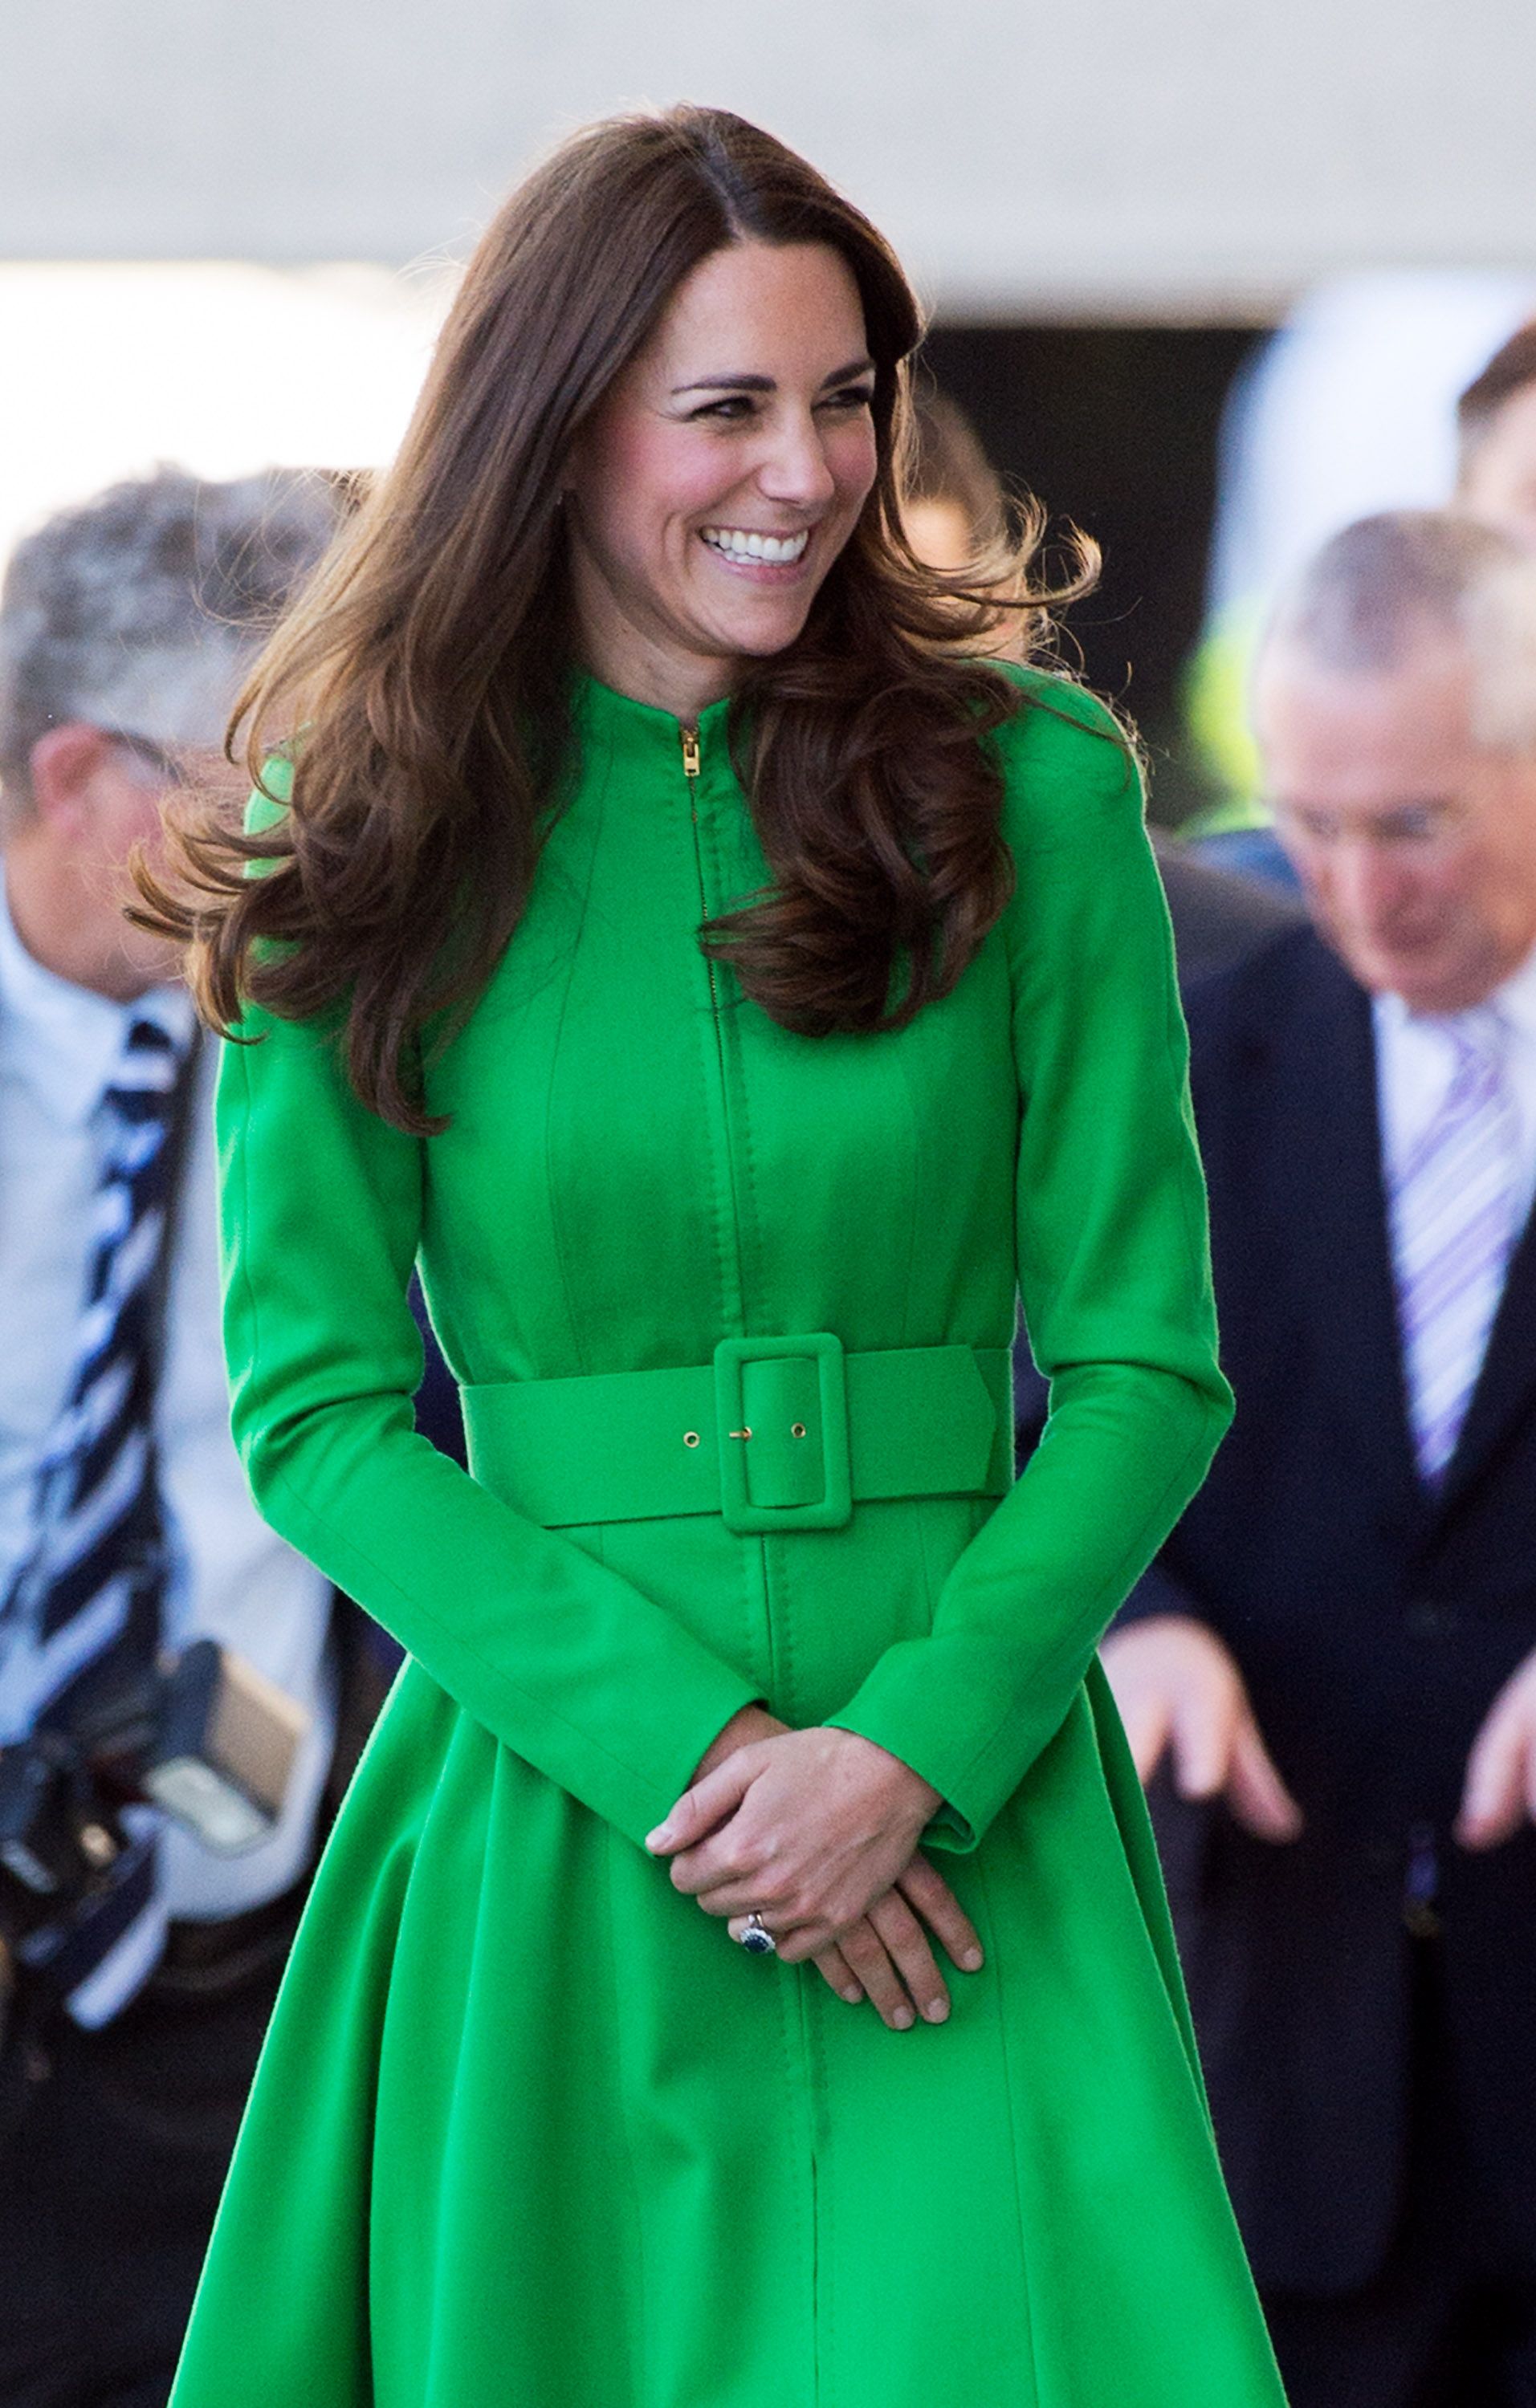 Kate Middleton the Duchess of Cambridge visits the National Portrait Gallery on April 24, 2014 | Photo: Getty Images.